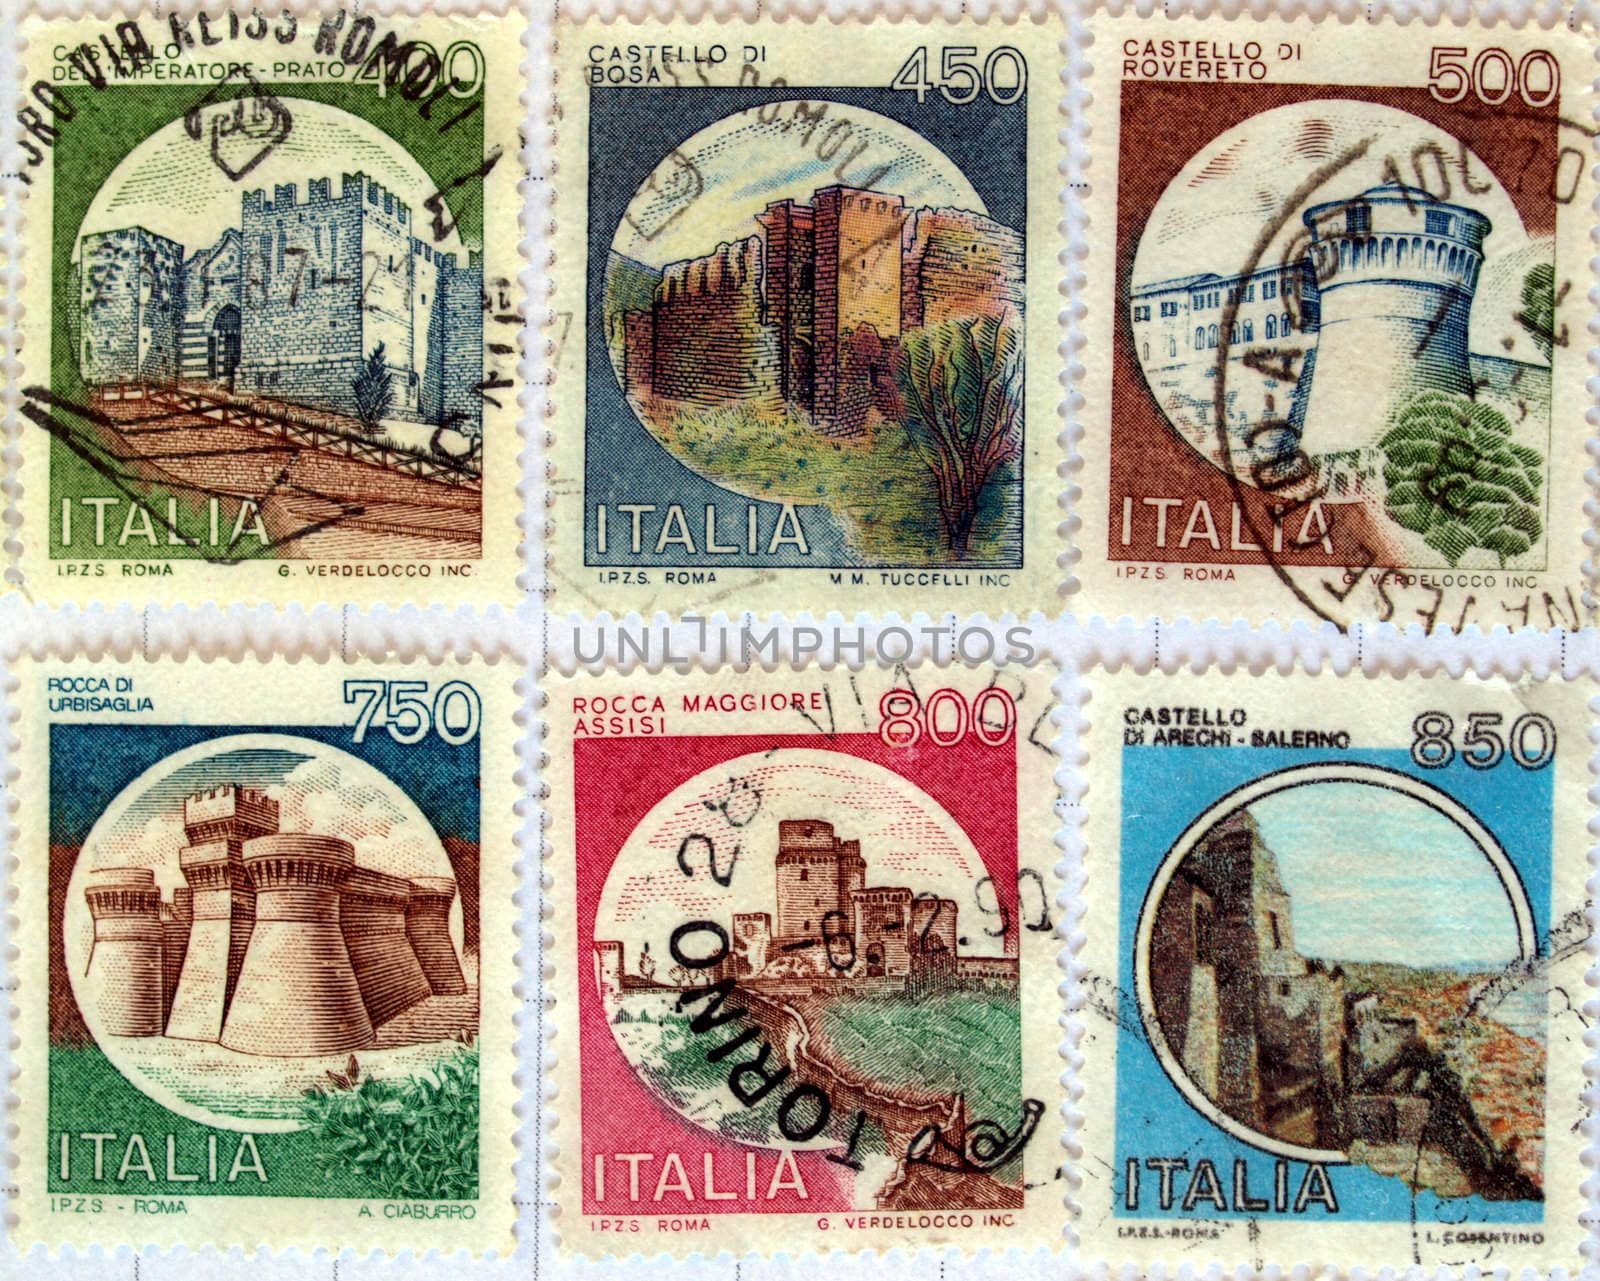 Italian stamps with castels depicted on them by paolo77